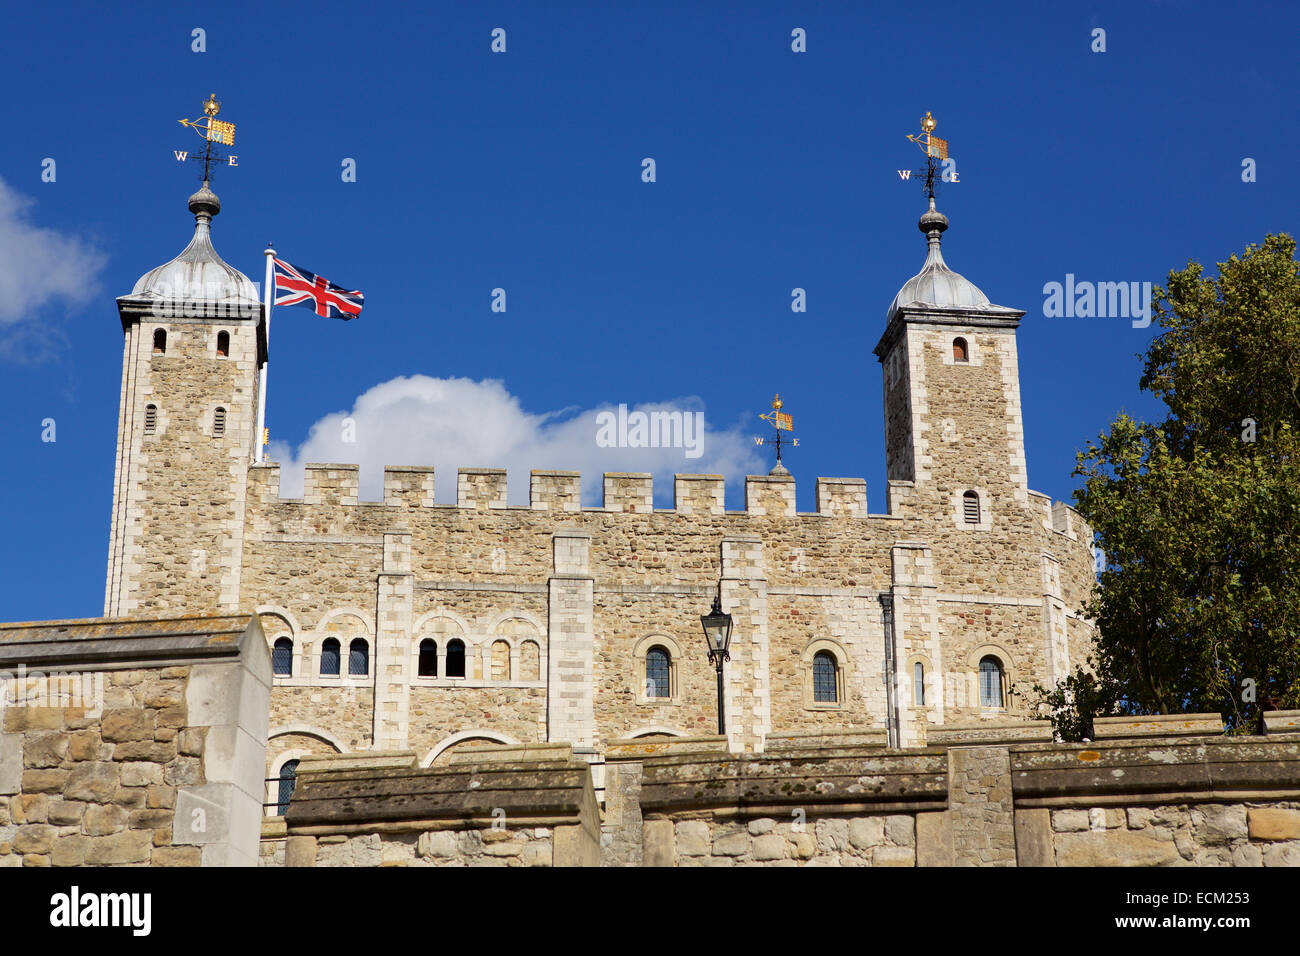 The tower of London. Famous view of the tower; the Union Flag flying on the tower against a blue sky. Stock Photo